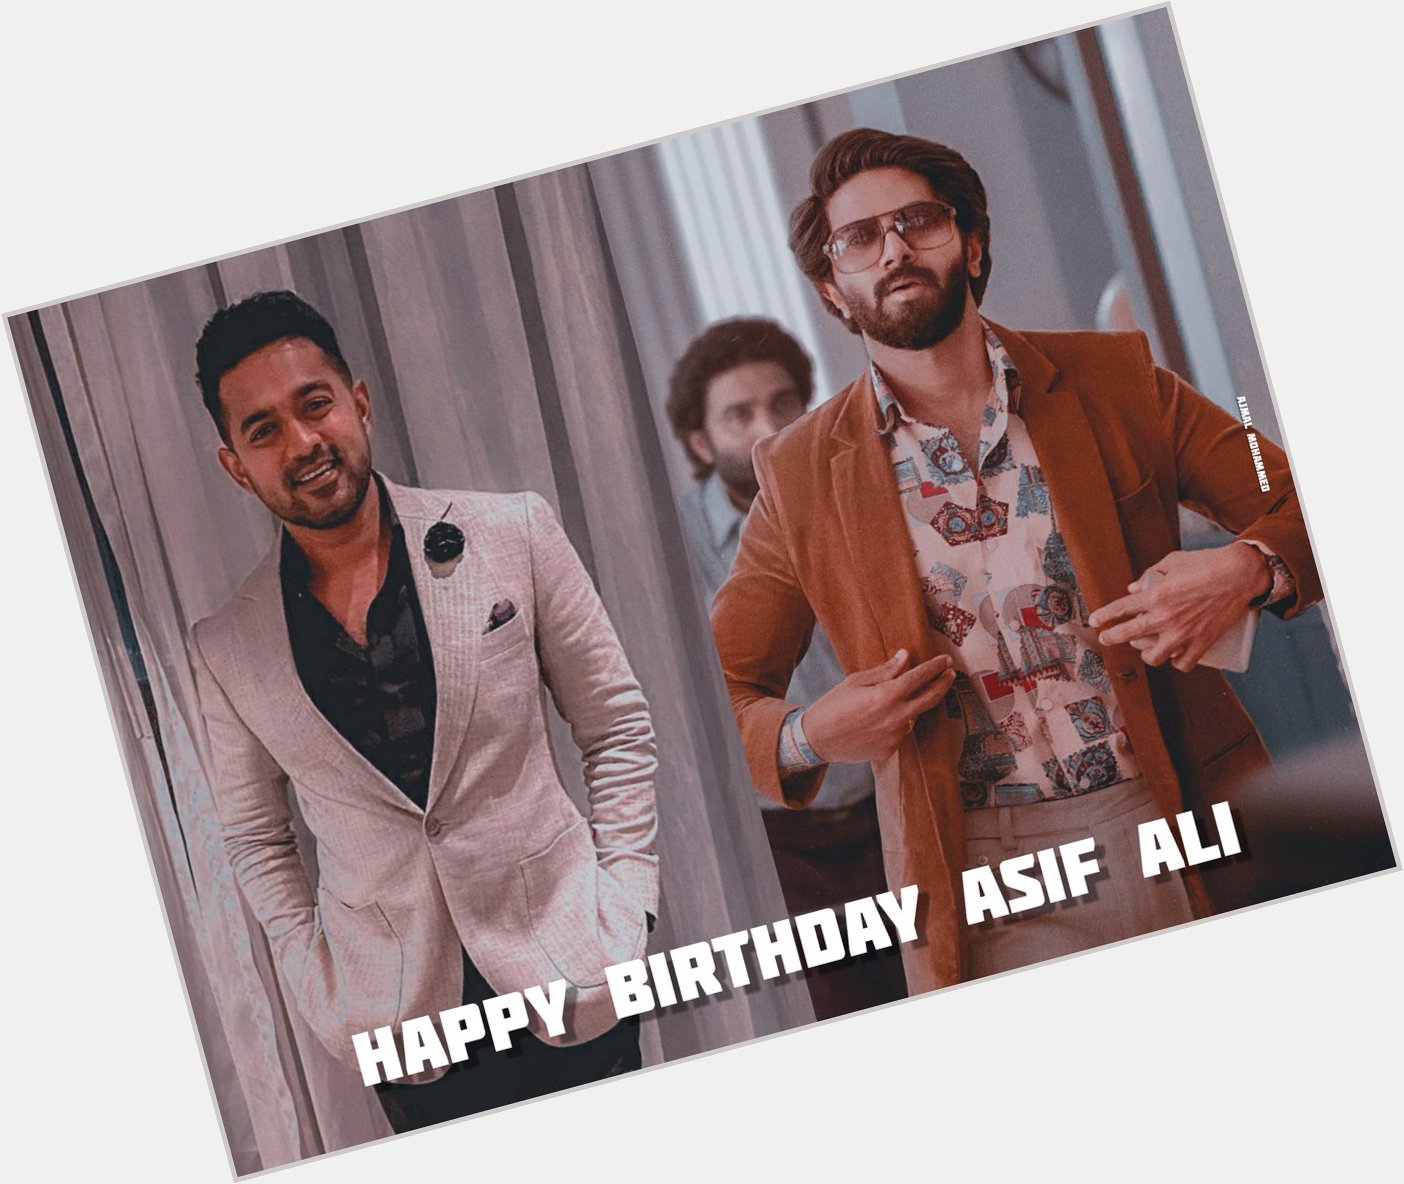 Wishing a very happy birthday to Asif Ali by Dulquer Salmaan Fans. 